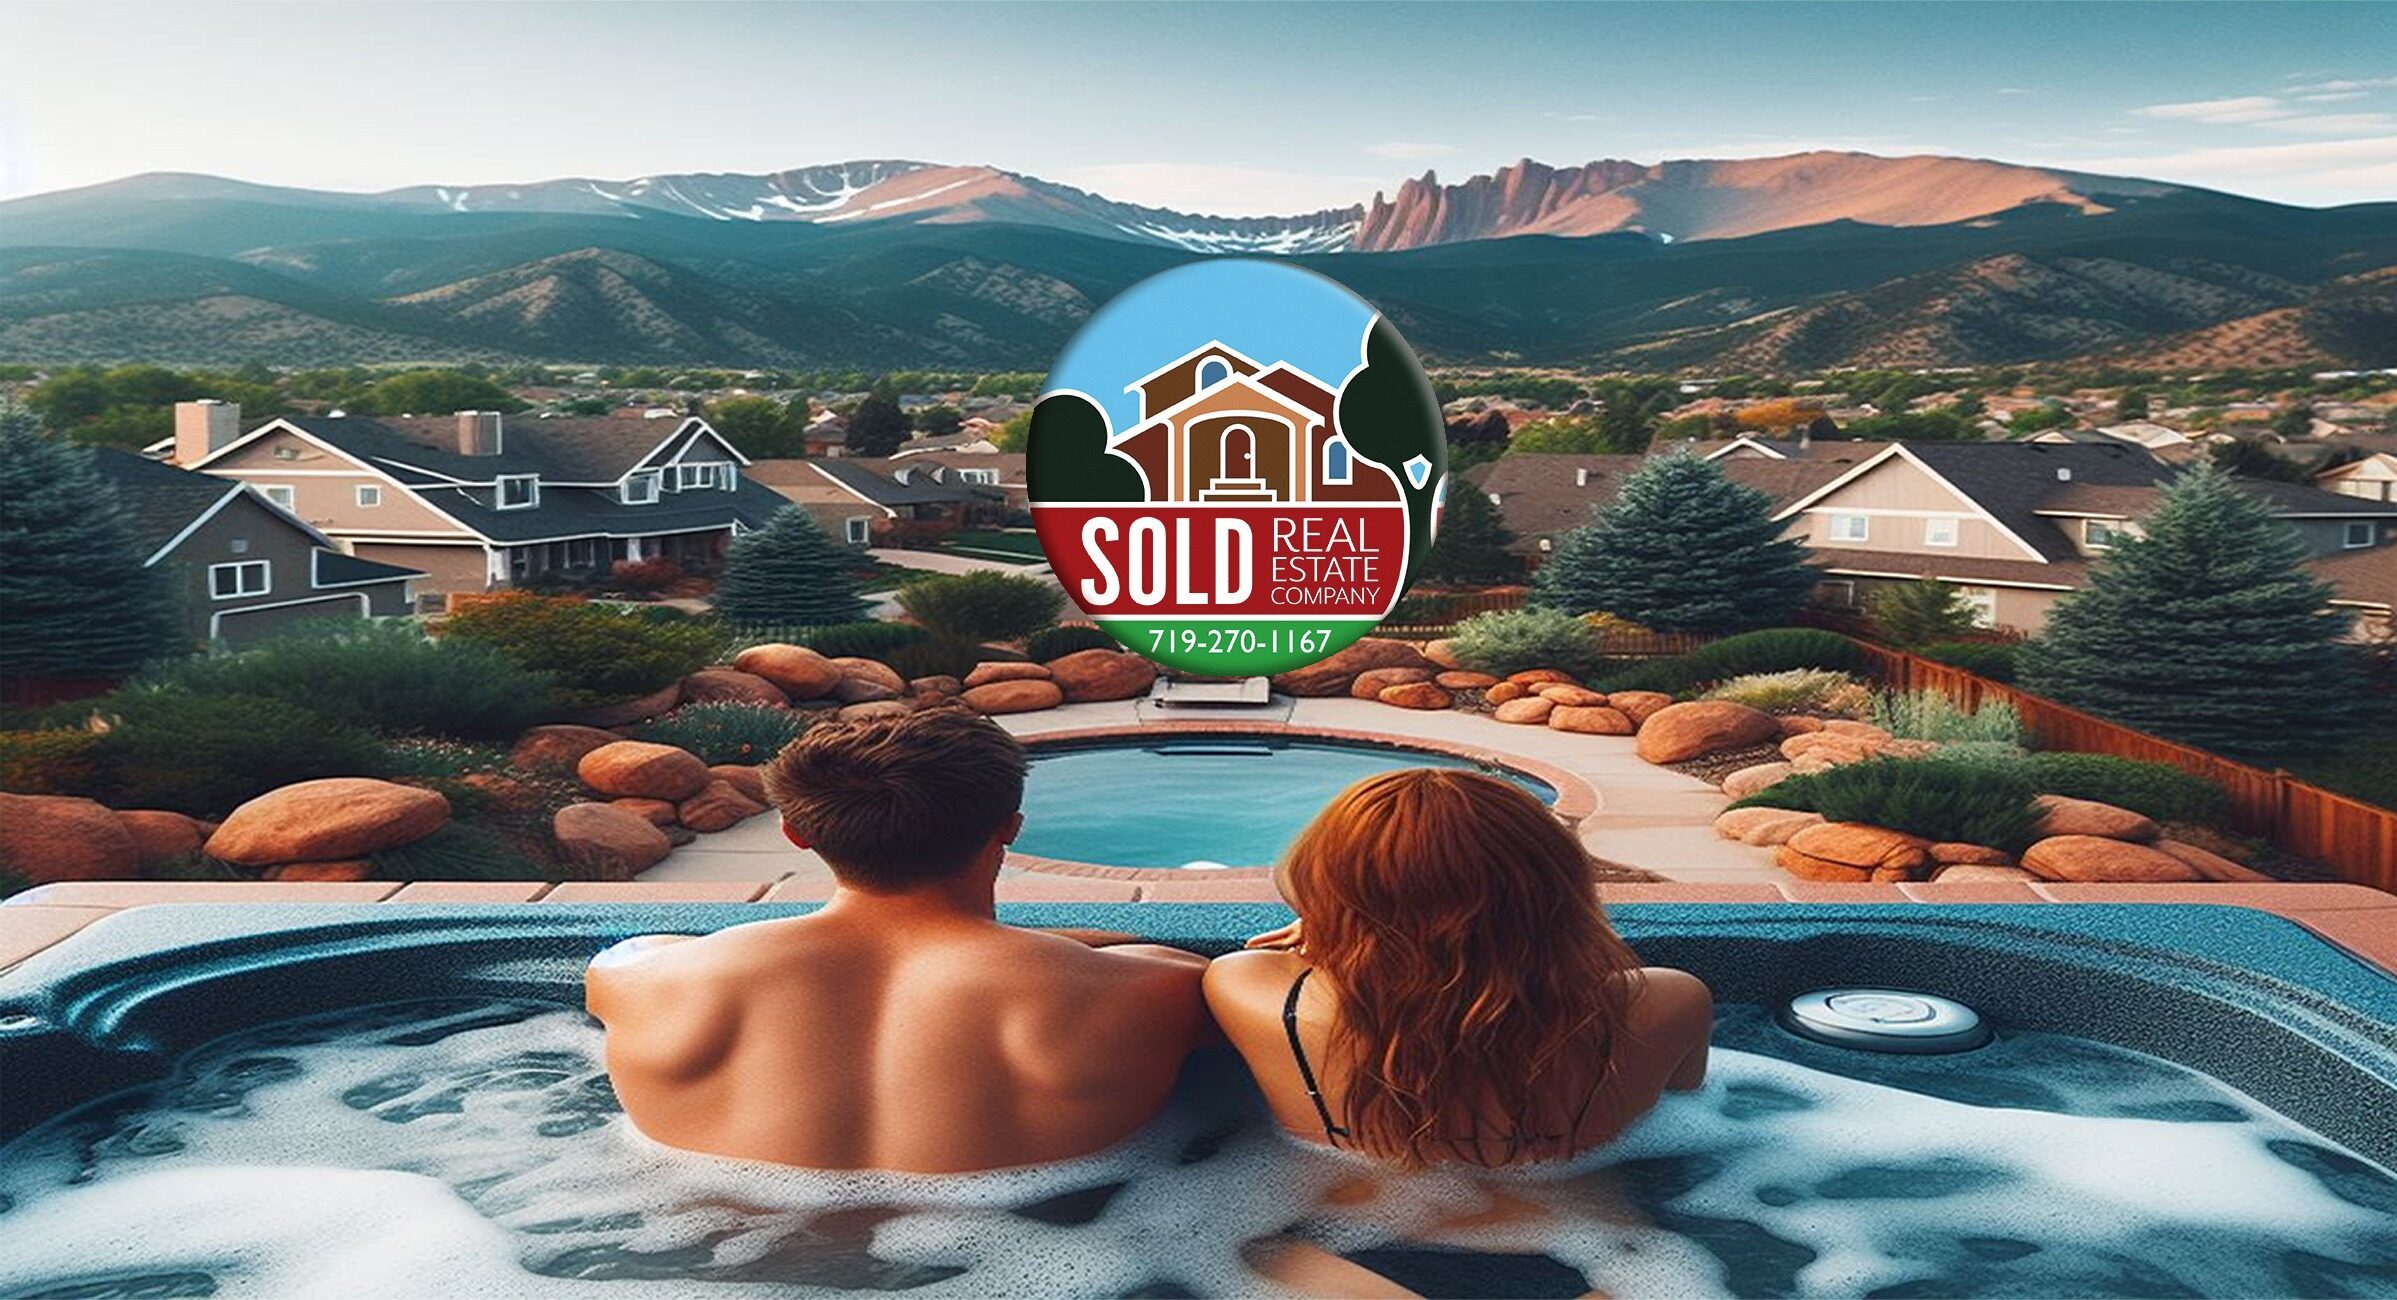 Sell or Buy a home in Colorado Springs  Info, Videos & More!